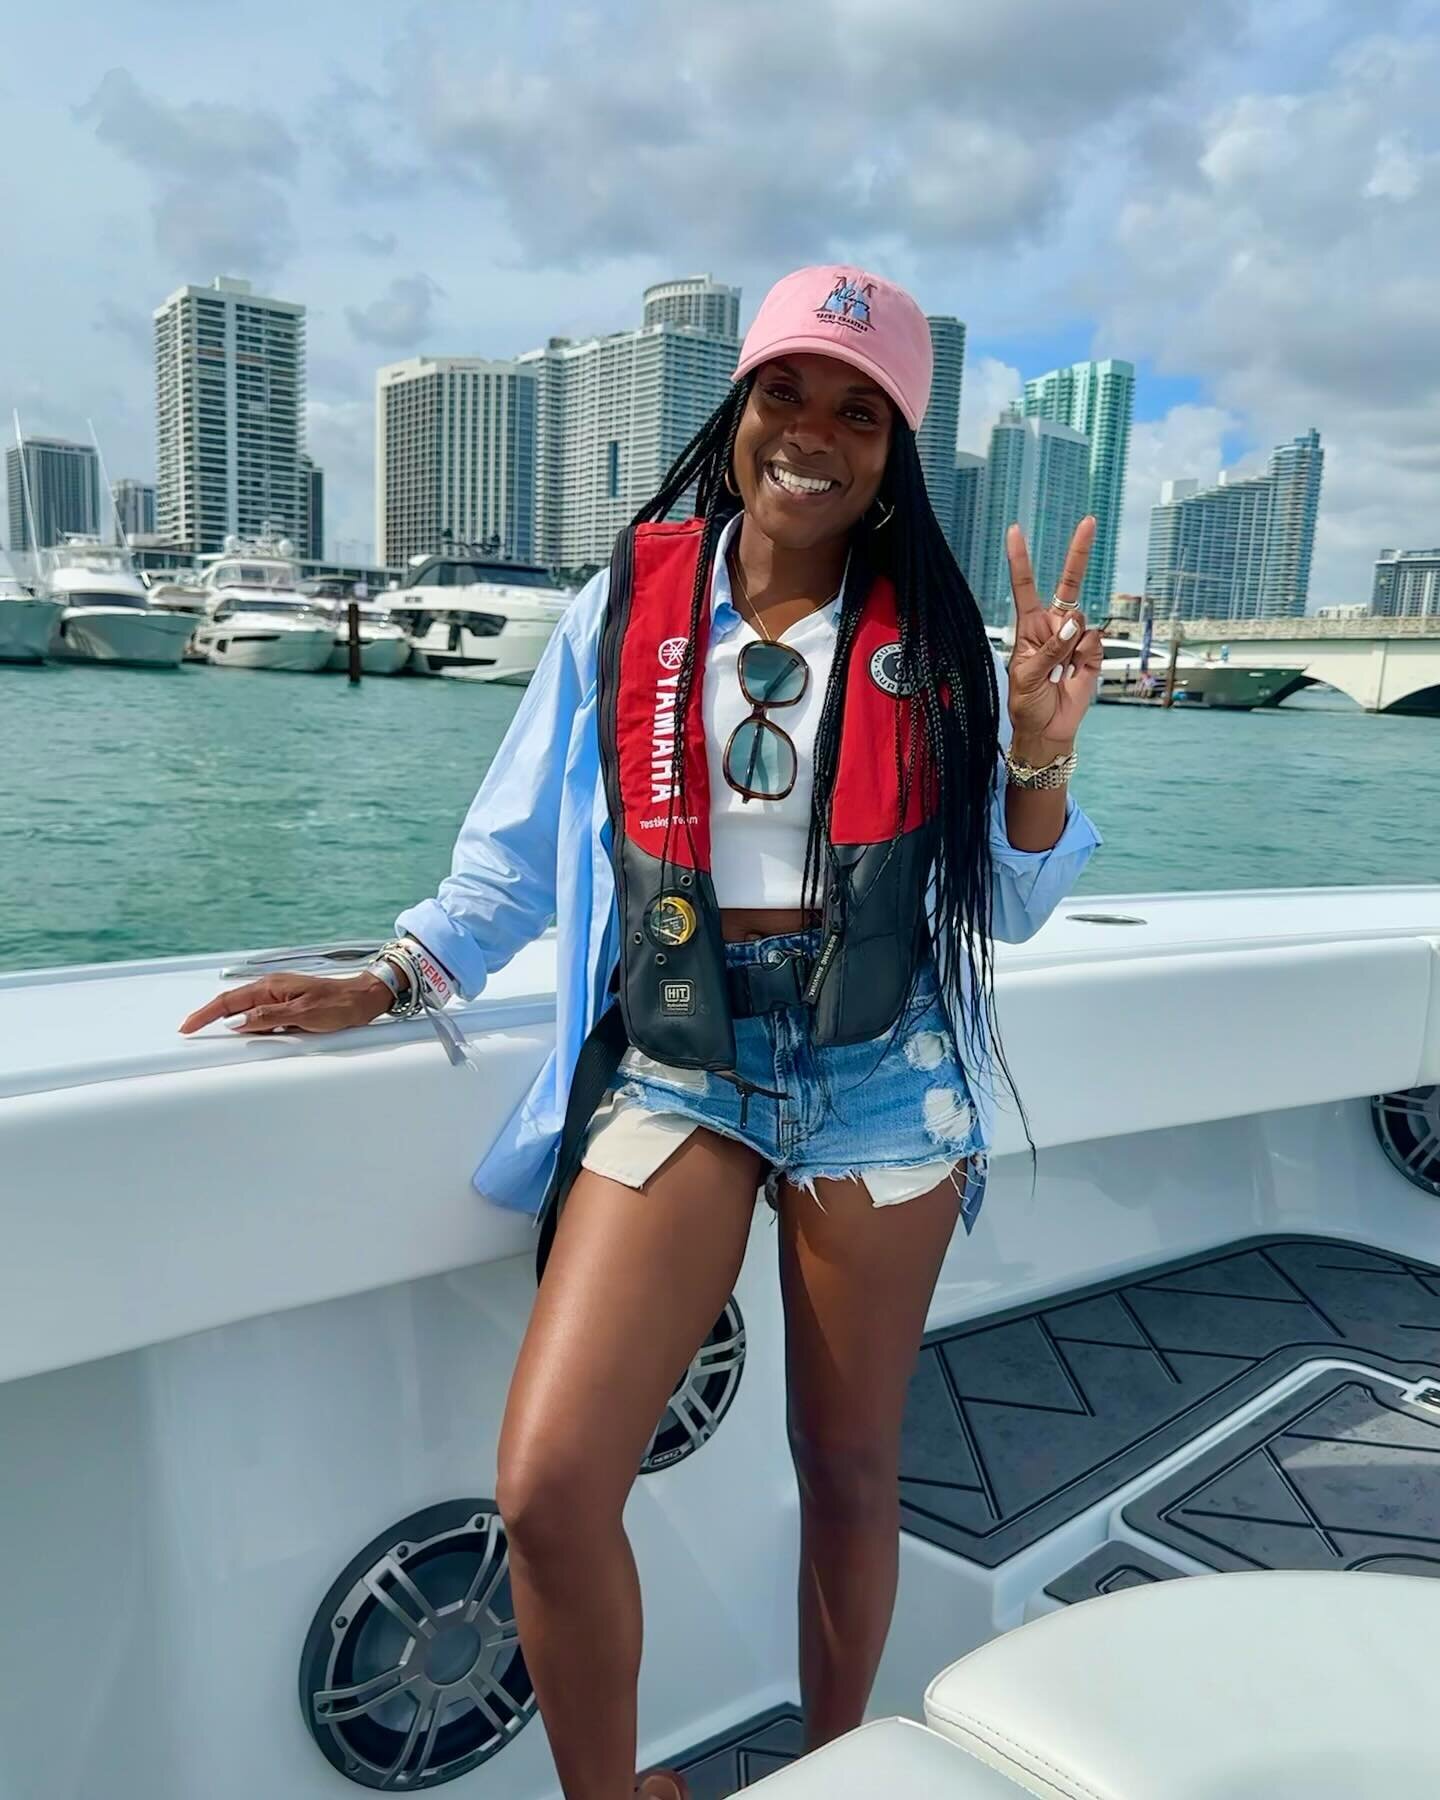 Last week our COO, Sharah, had the pleasure of attending the @discoverboating Miami International Boat Show for the second year! 

@miamiboatshow is the largest boat and yacht show in the world!  You can check out everything from kayaks to superyacht